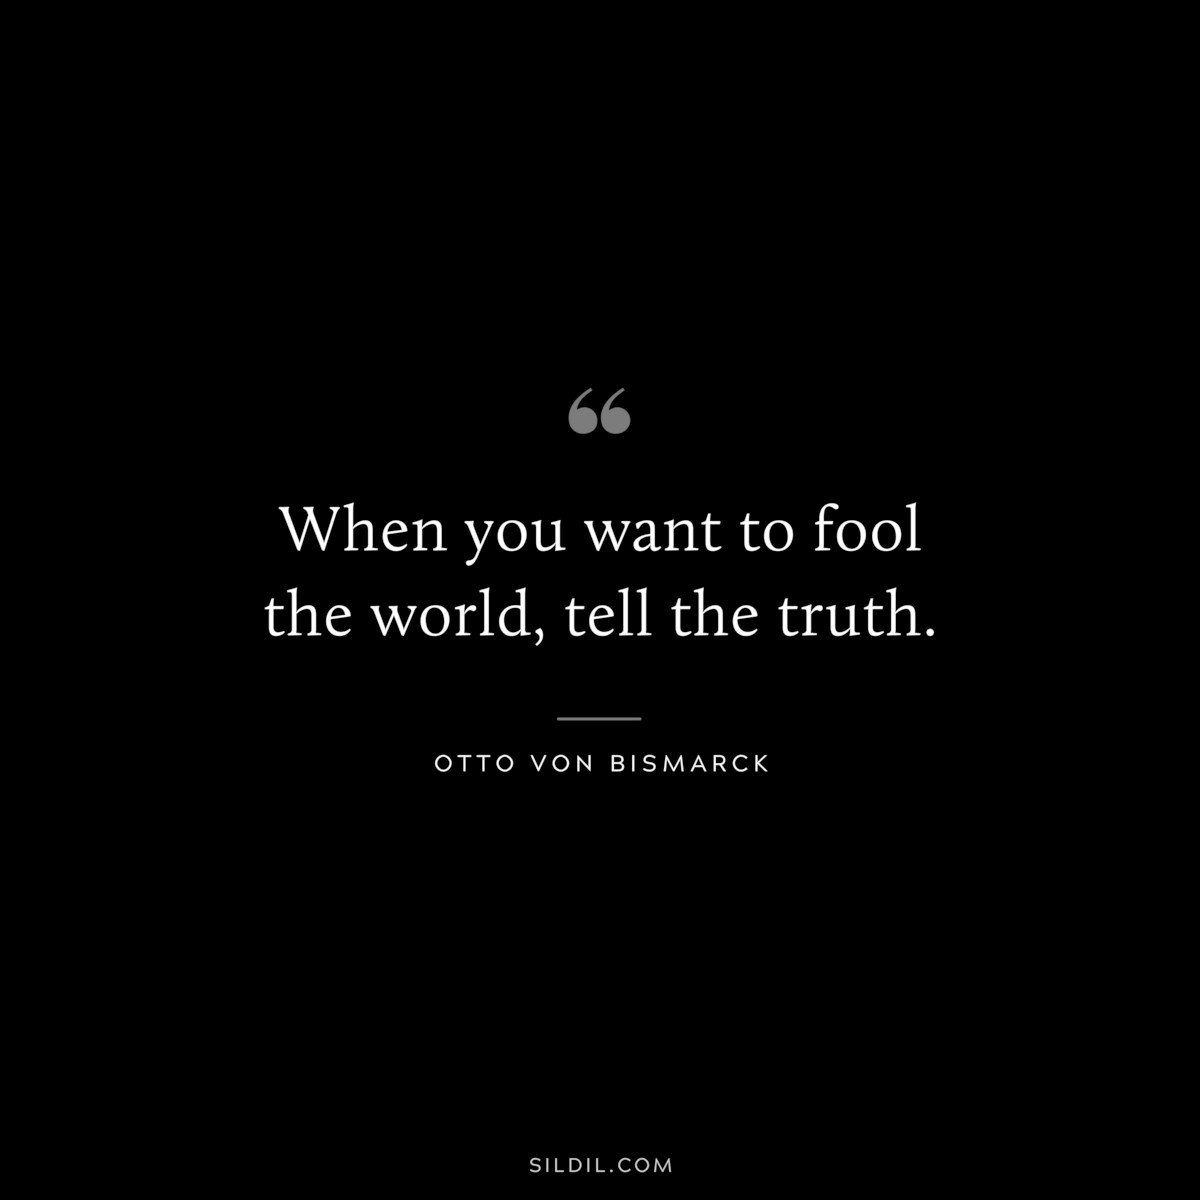 When you want to fool the world, tell the truth. ― Otto von Bismarck